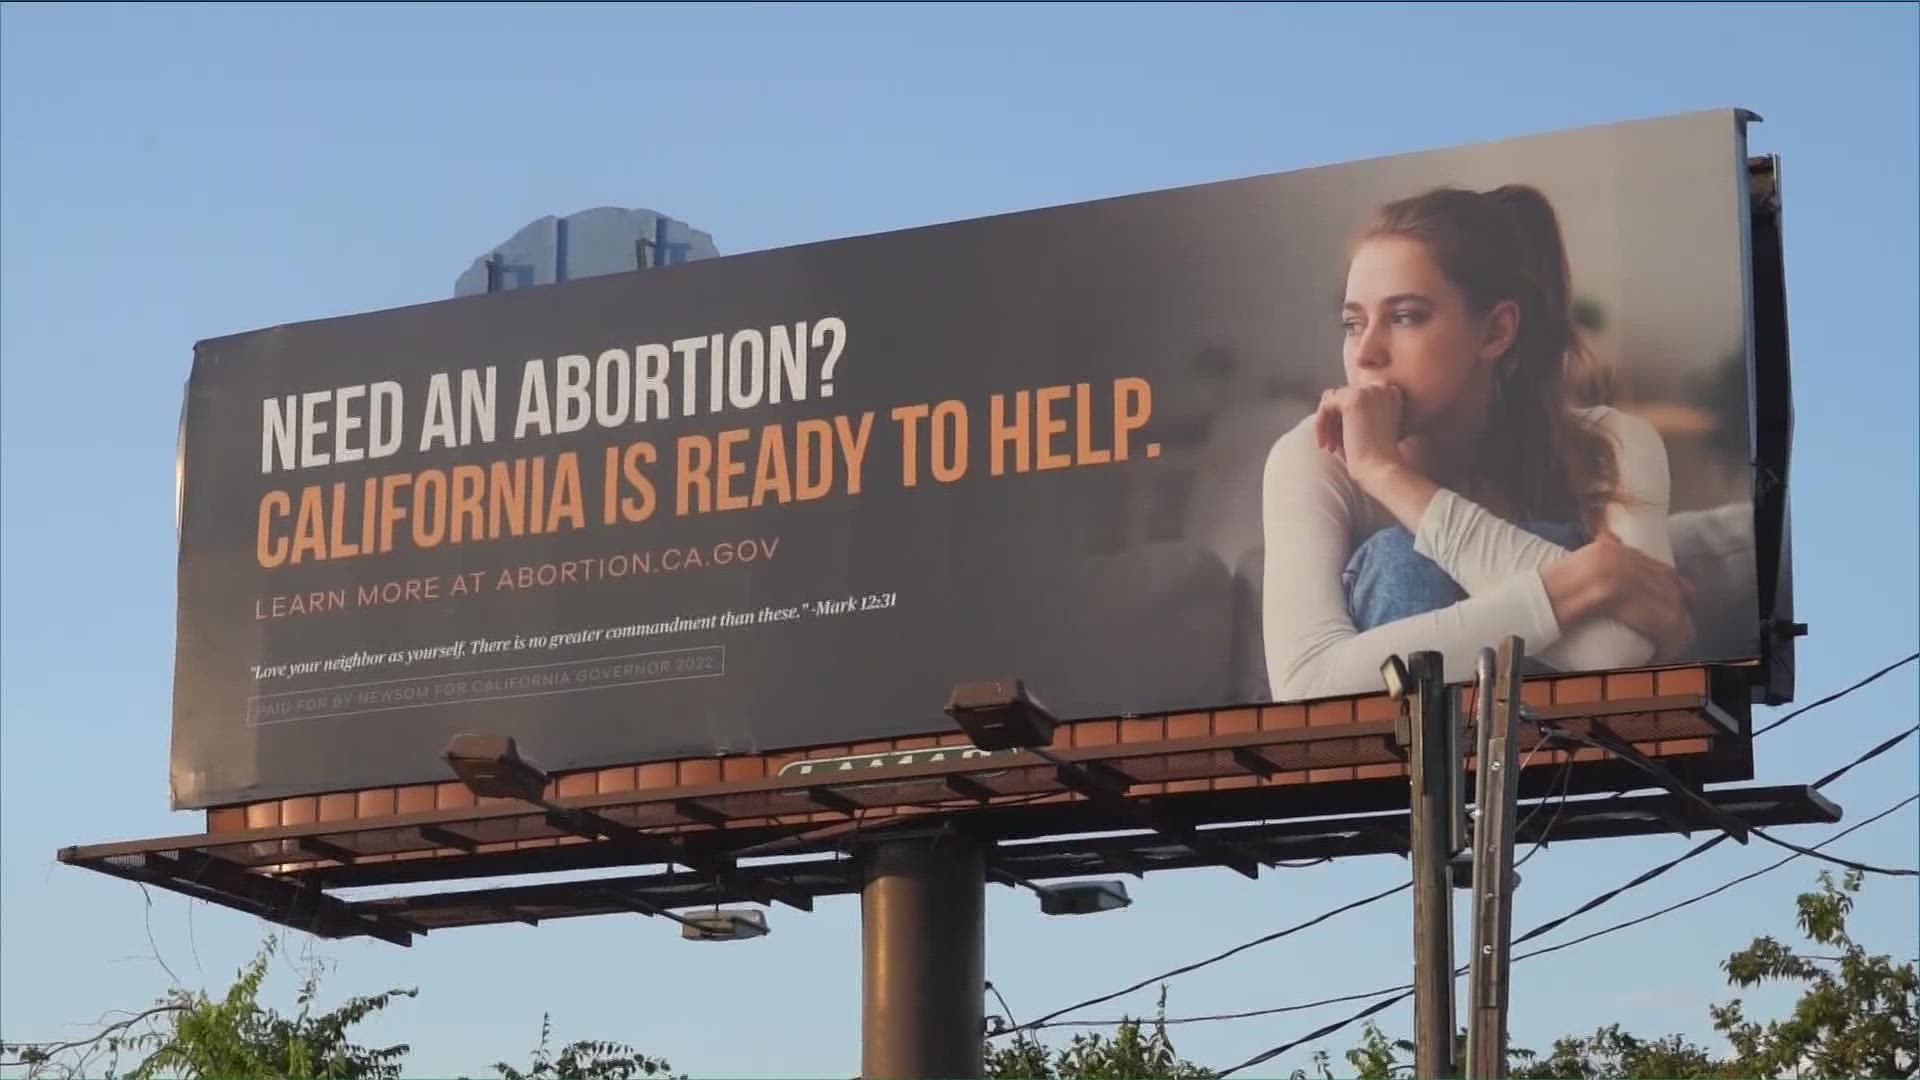 Gov. Newsom has put the billboards across Texas to encourage Texas women to come and get abortion services out-of-state